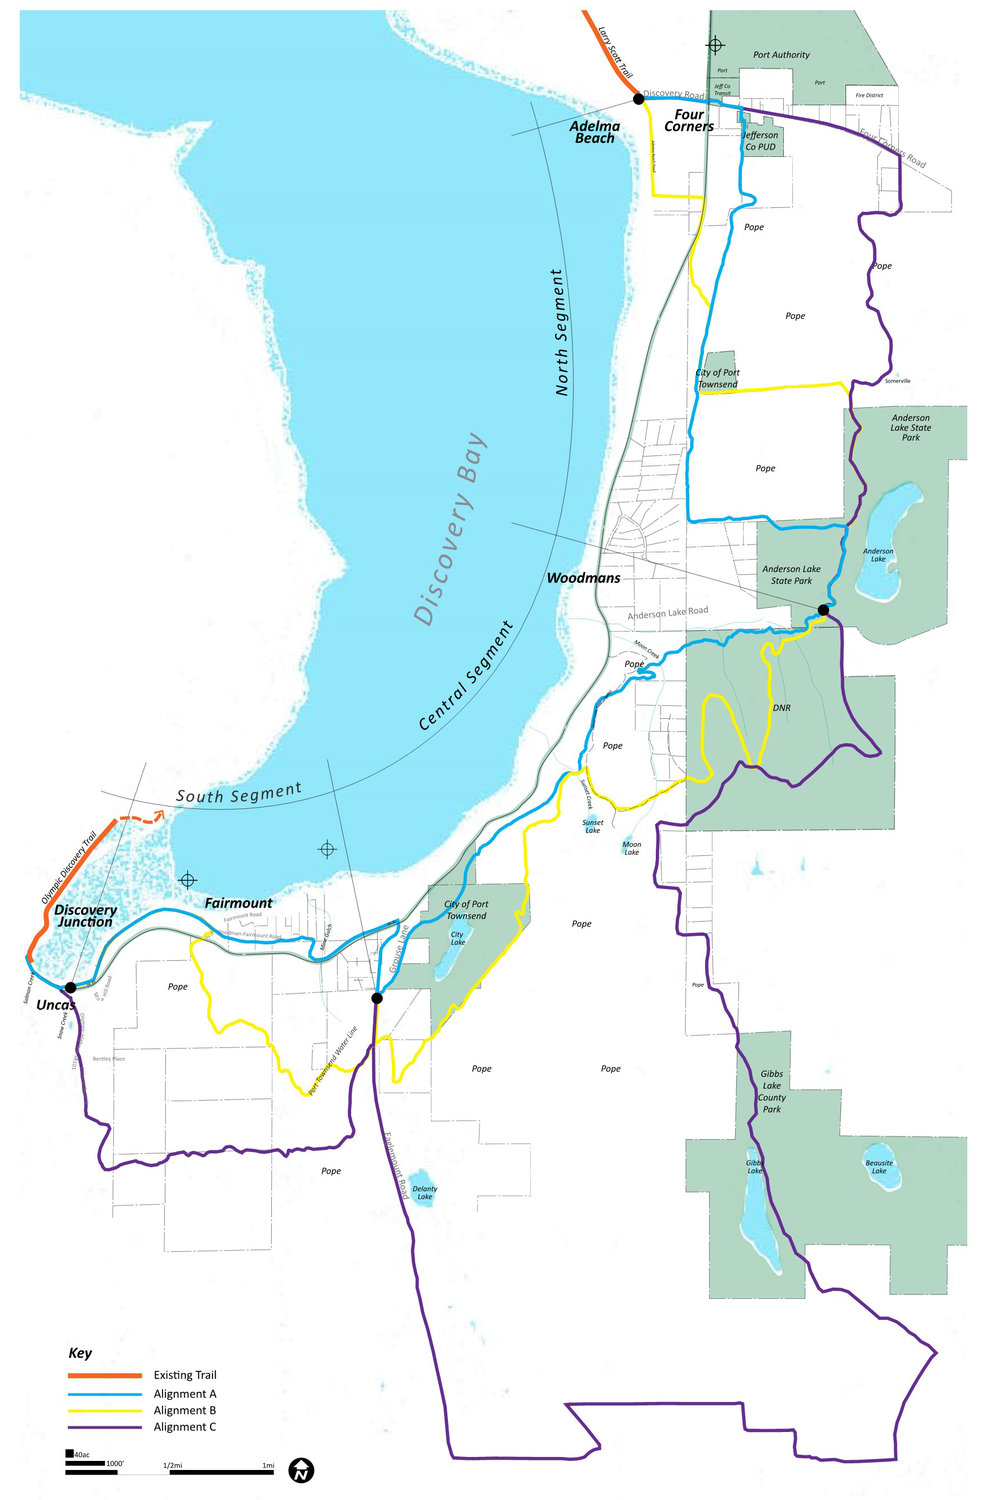 Proposed trail routes connecting the Larry Scott to the Milo Curry trailhead.